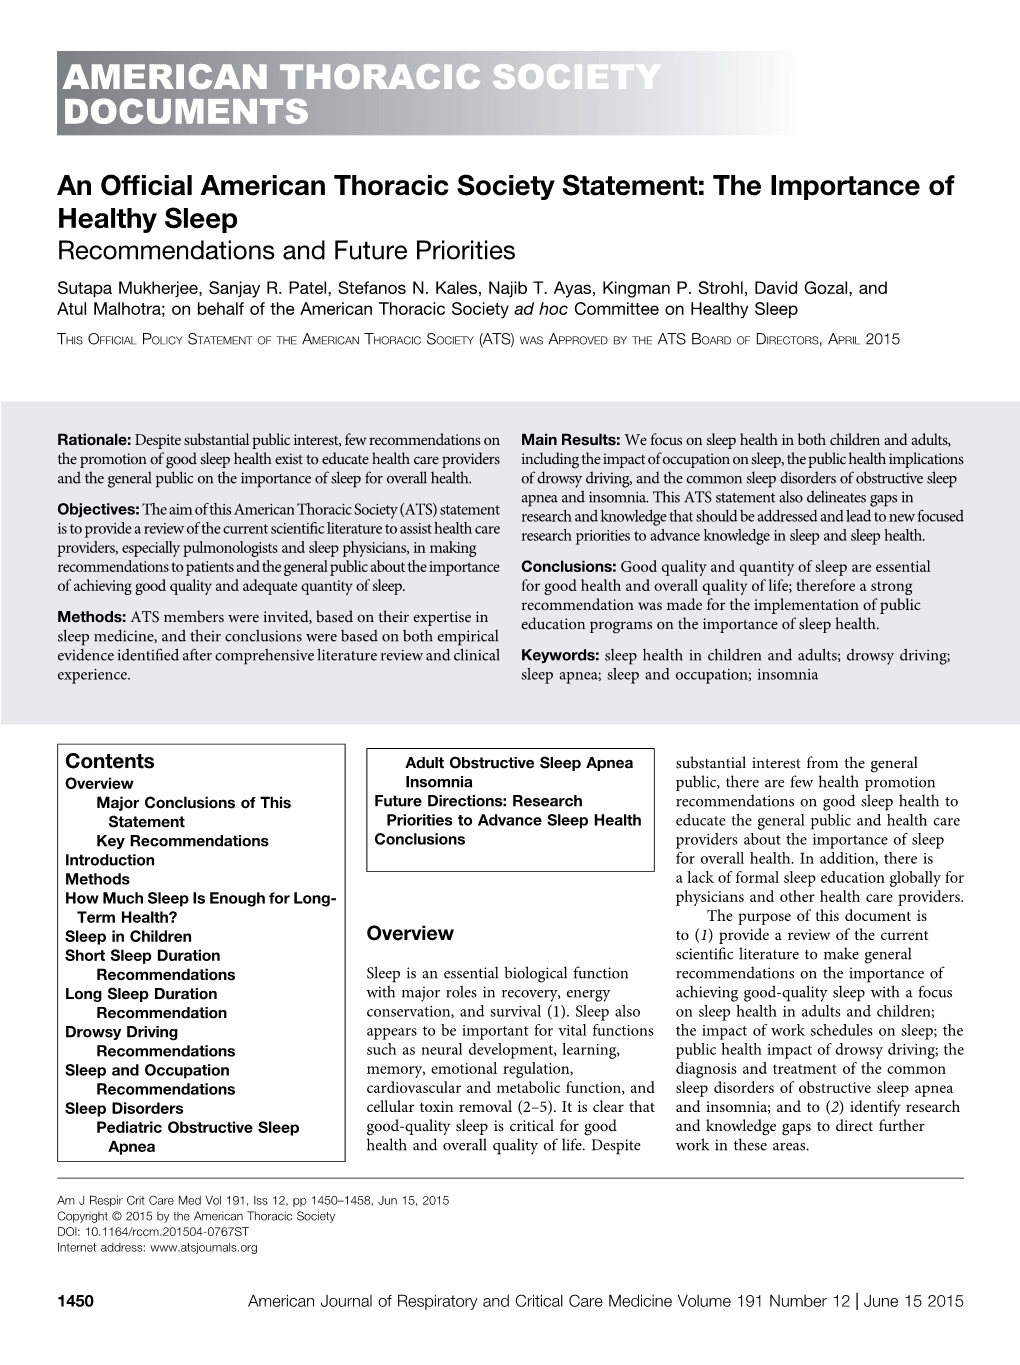 An Official American Thoracic Society Statement: the Importance Of